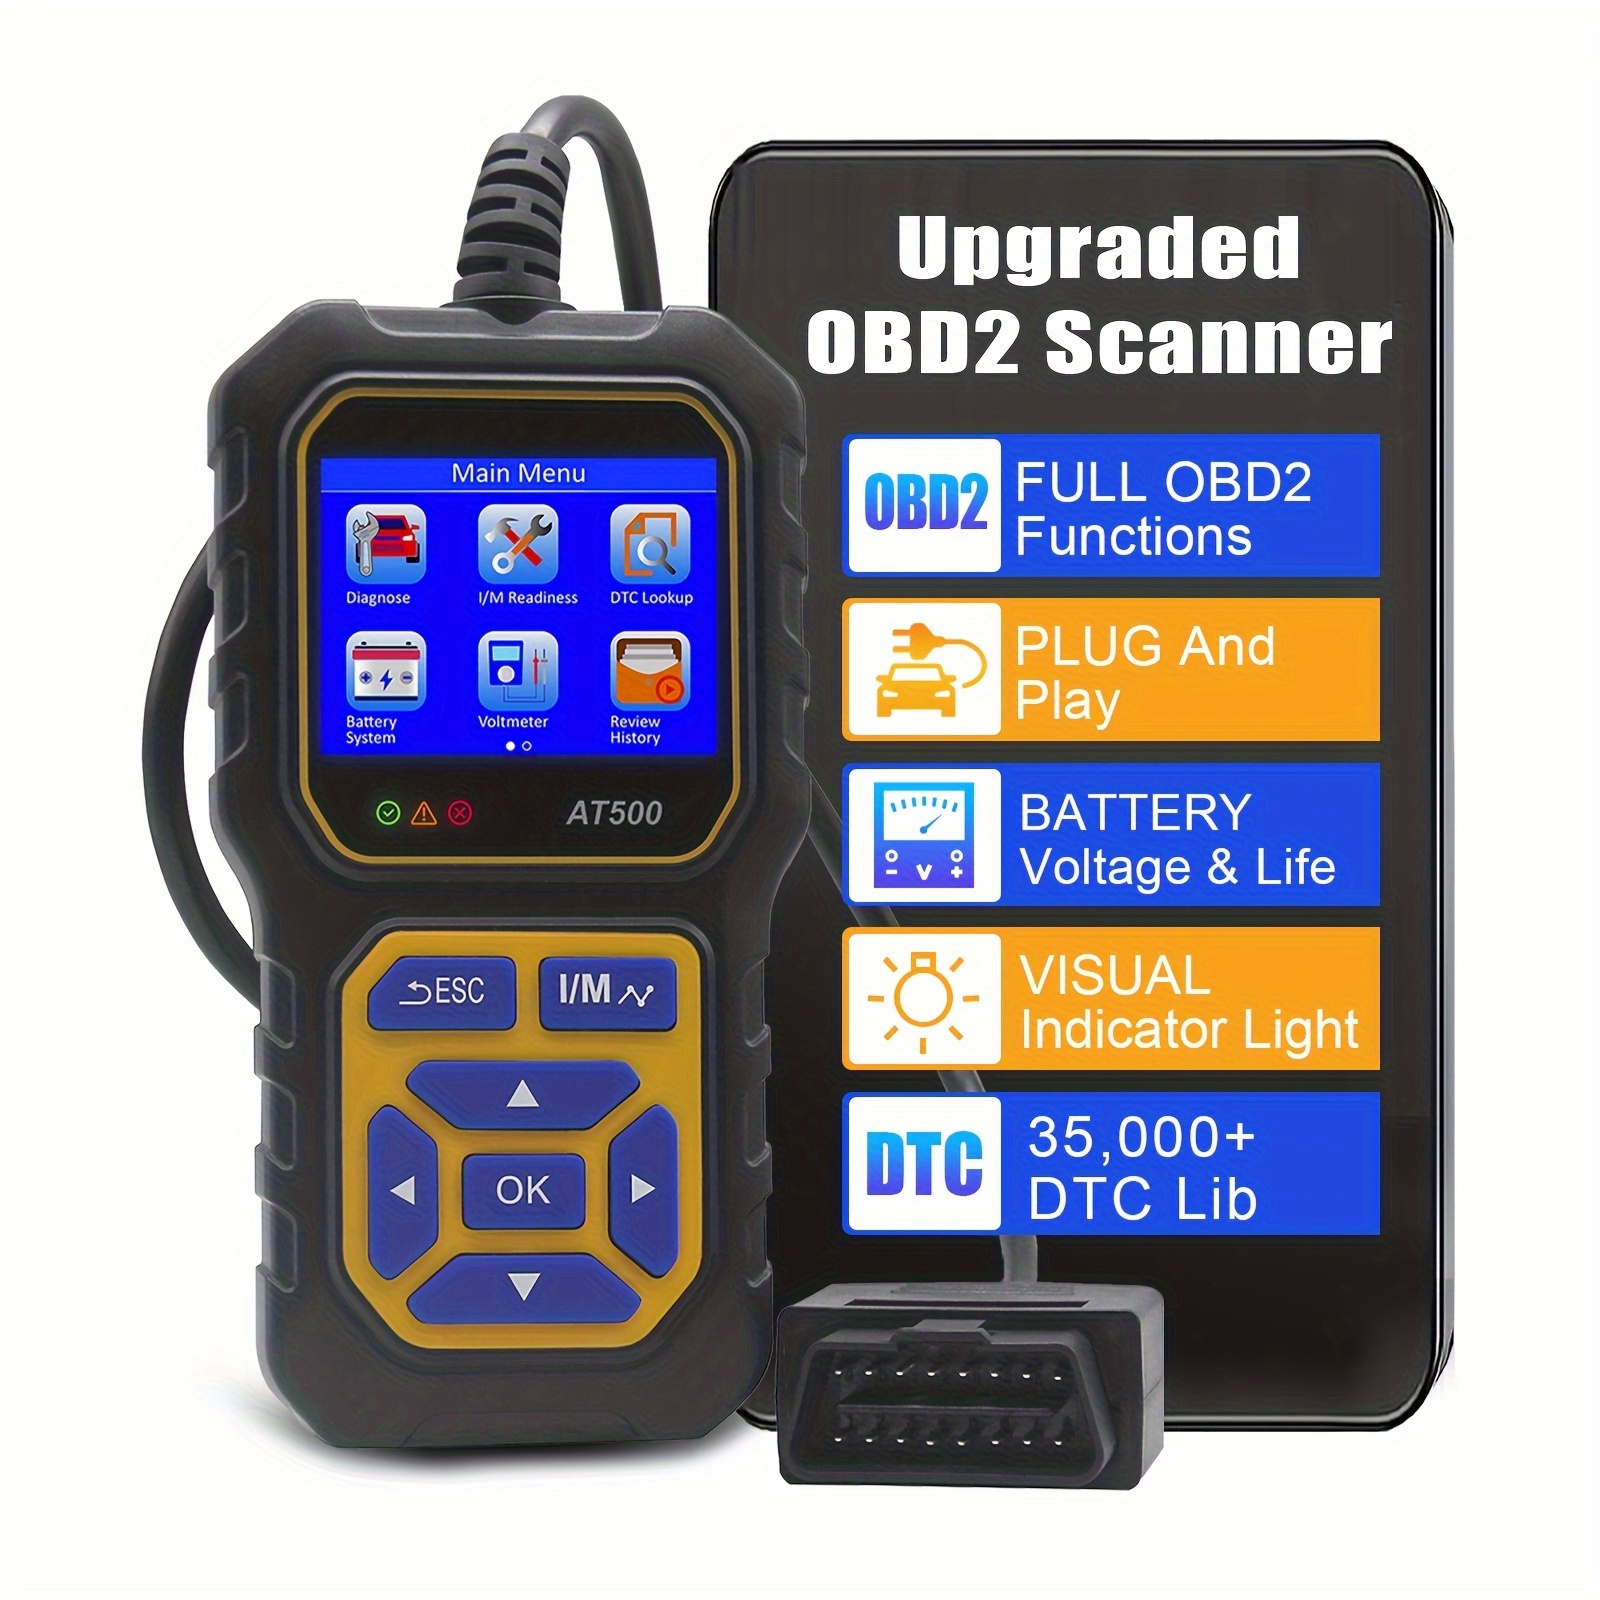 

Obd2 Code Reader Diagnostic Tool, Obdii Car Code Scanner Check Engine Fault Code Scanner Live Data Im Readiness Cranking And Charging Eobd Can Reader Diagnostic Tool For Obdii 12v Cars Since 1996